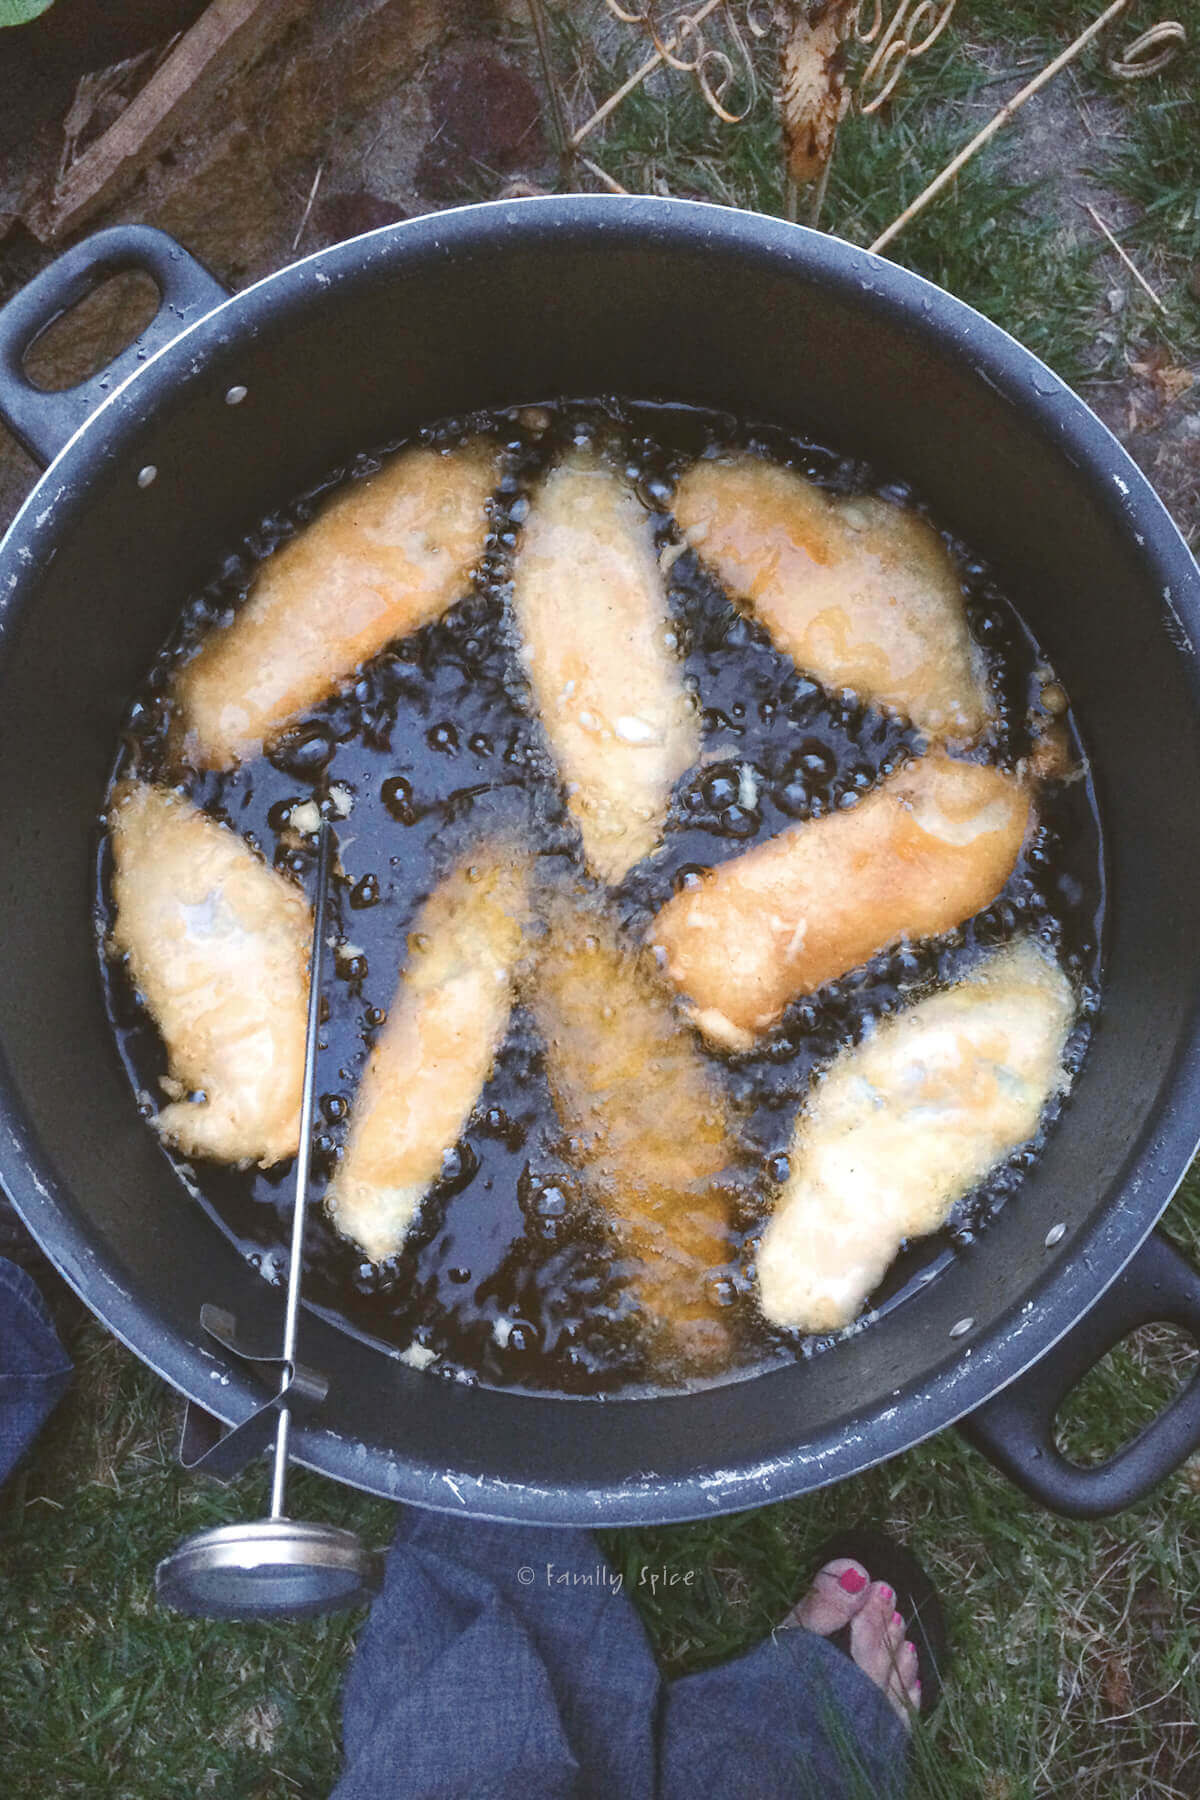 Top view of a large pot with hot oil, beer battered fish frying in it and a thermometer attached